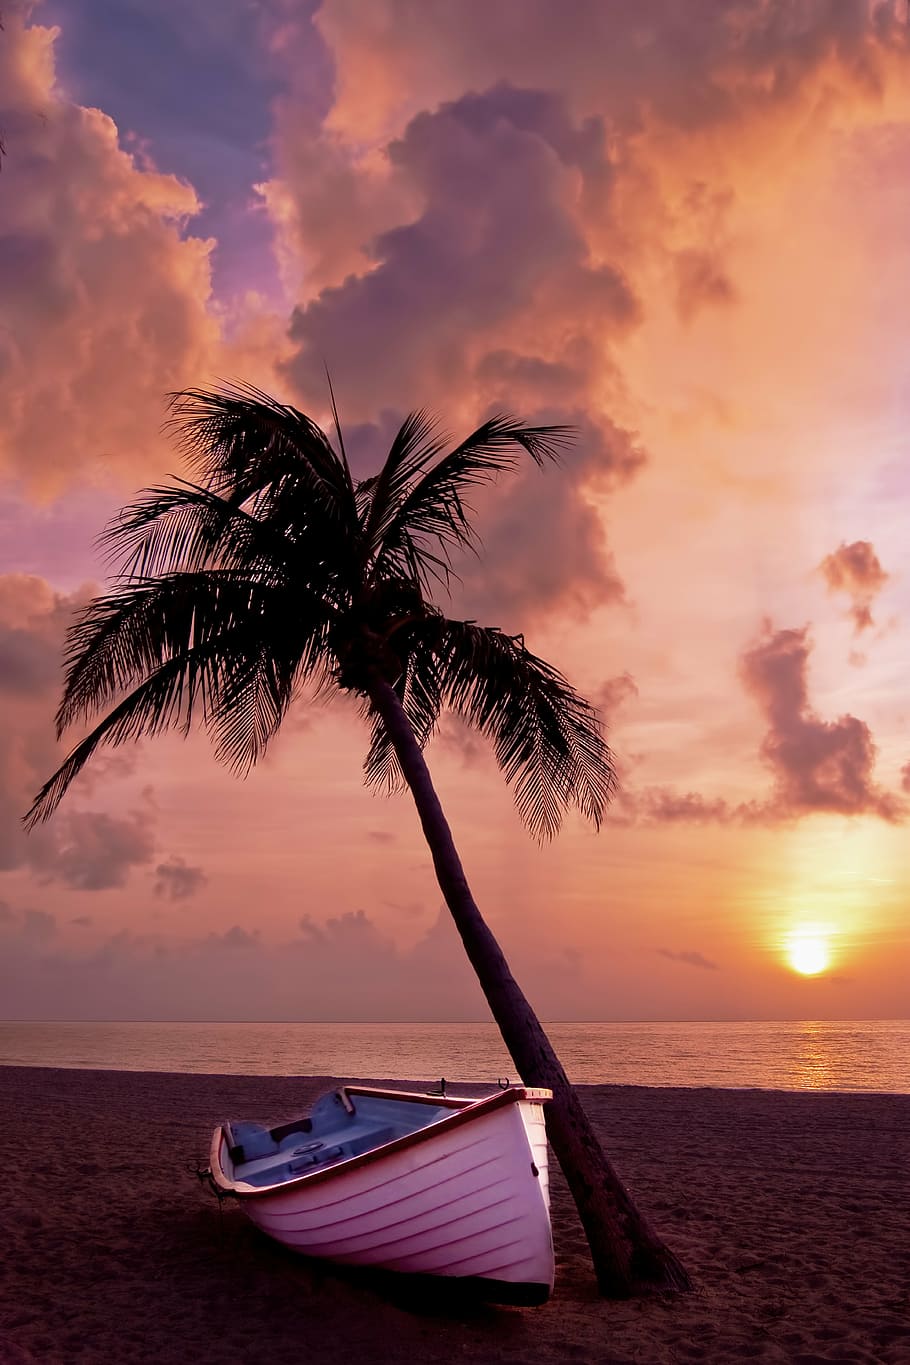 white, boat, coconut tree, beach, sunset, palm tree, palm, ocean, summer, vacation